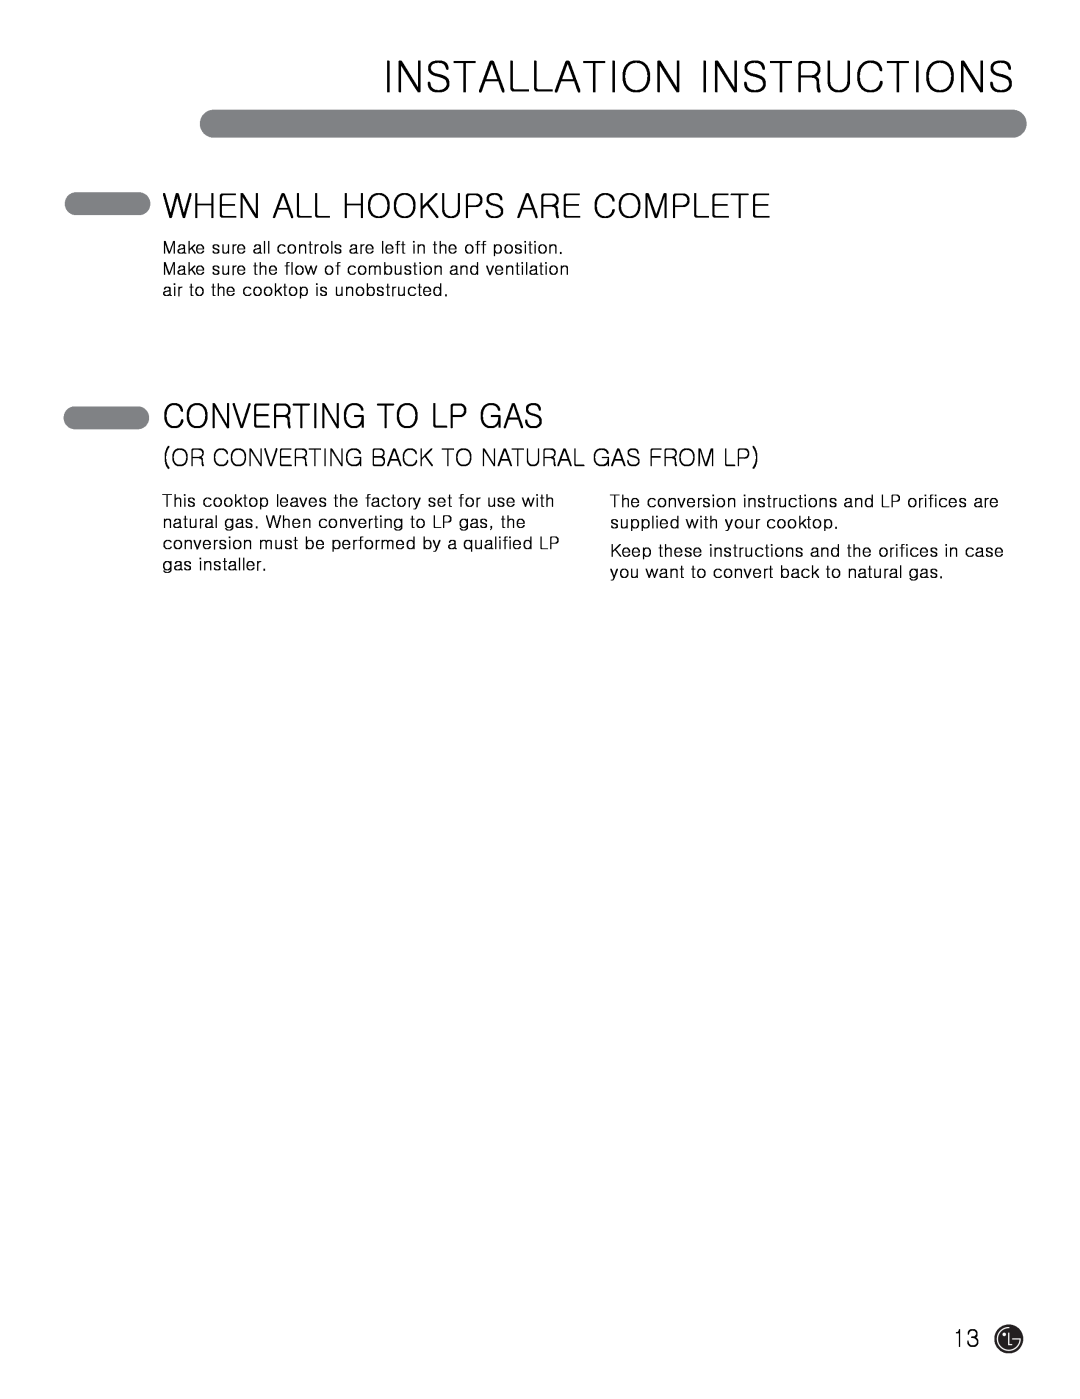 LG Electronics MFL62725501 When All Hookups Are Complete, Converting To Lp Gas, Or Converting Back To Natural Gas From Lp 